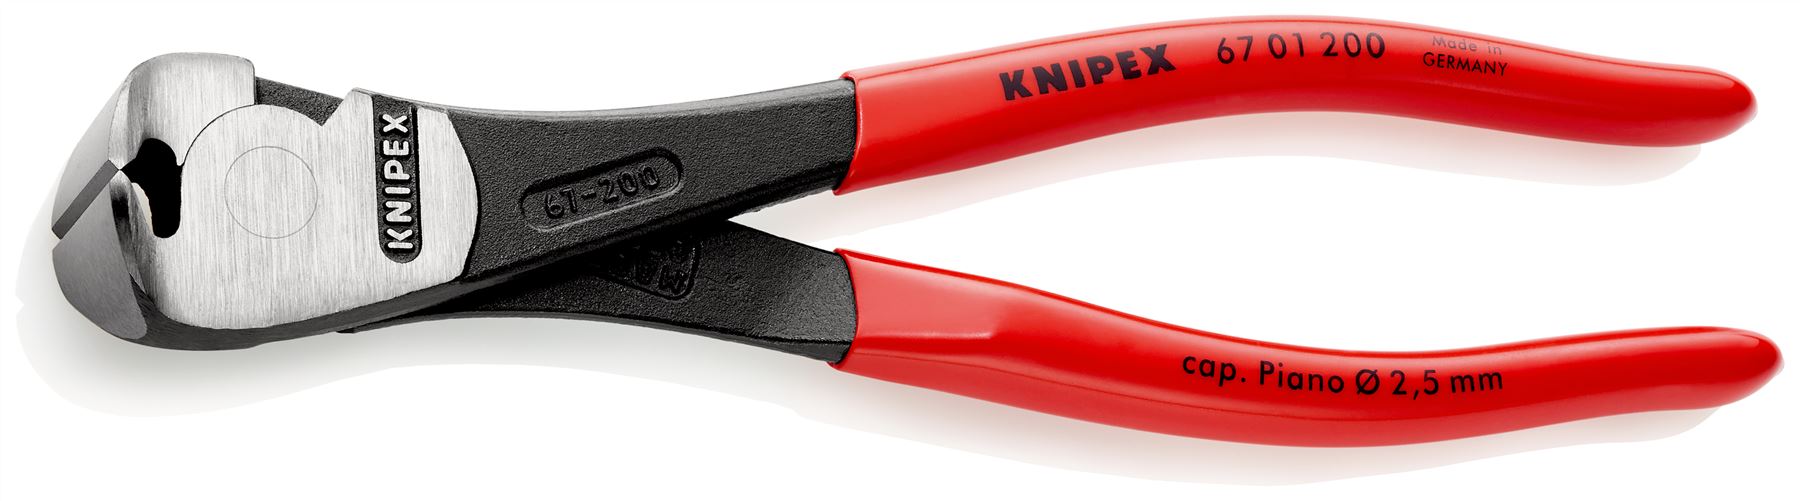 KNIPEX End Cutting Pliers Nipper High Leverage 160mm Plastic Coated 67 01 160 SB